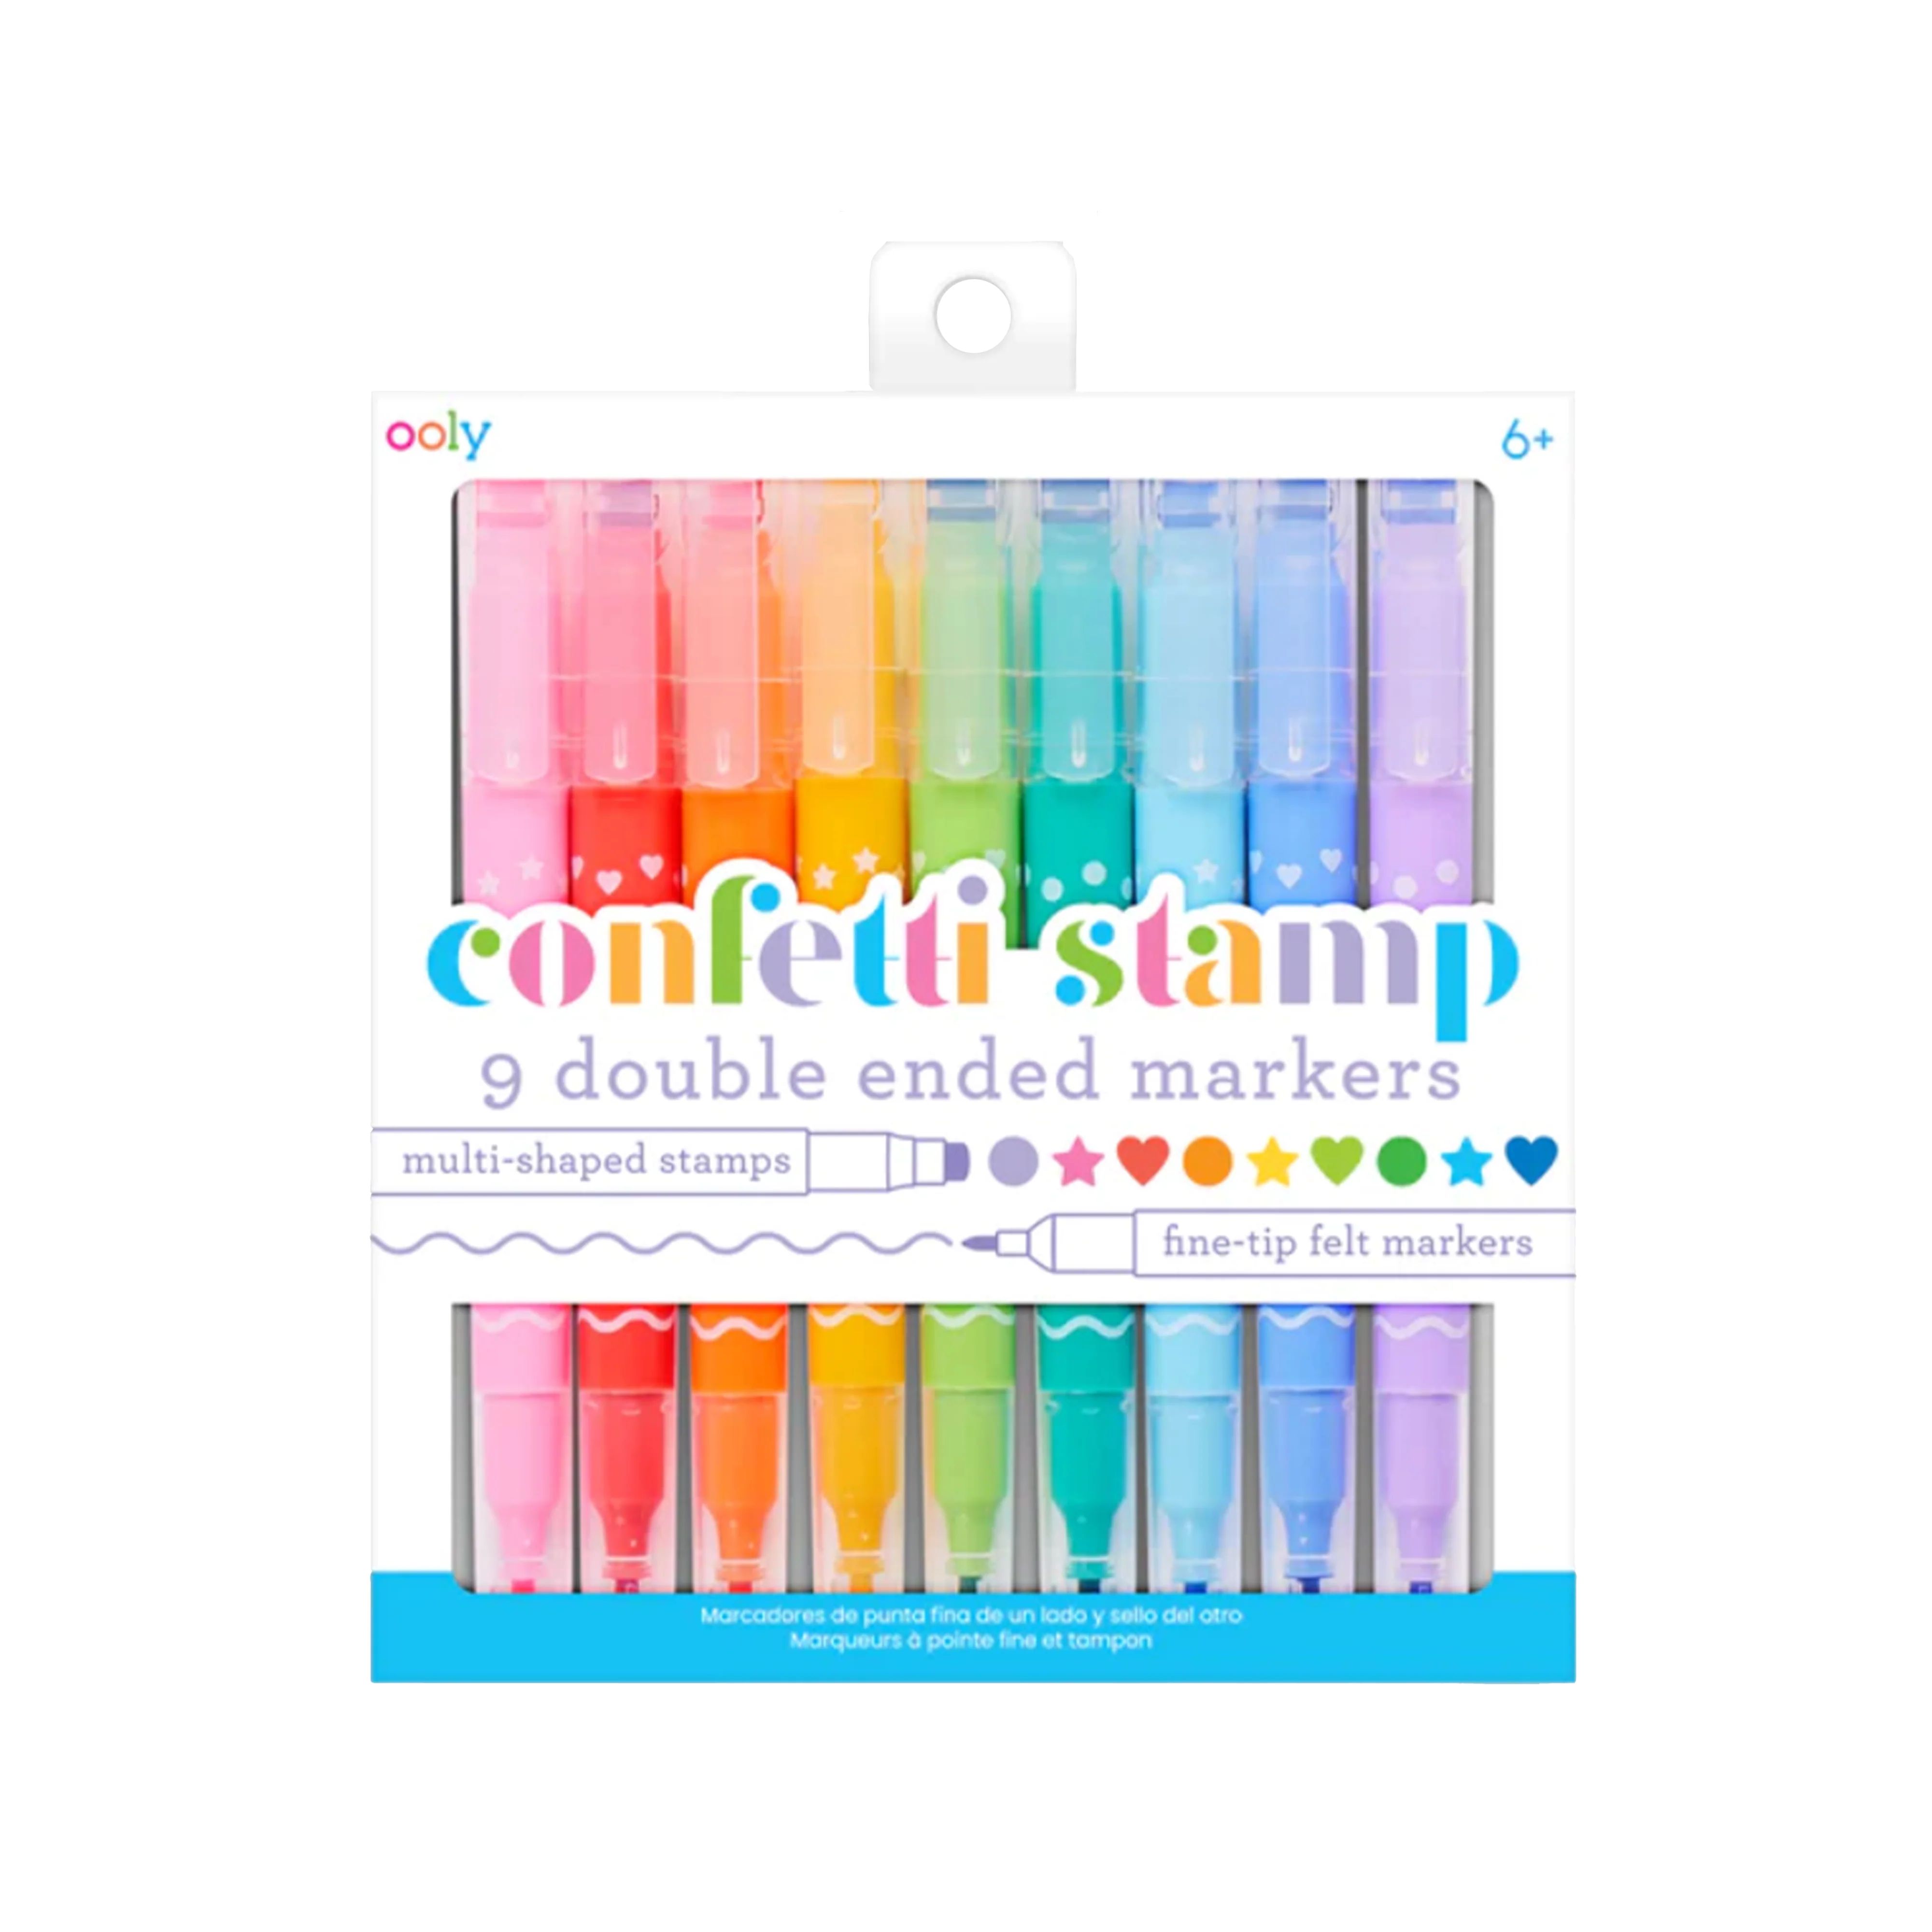 Confetti Stamp Double Ended Markers - Ooly | The Beaufort Bonnet Company